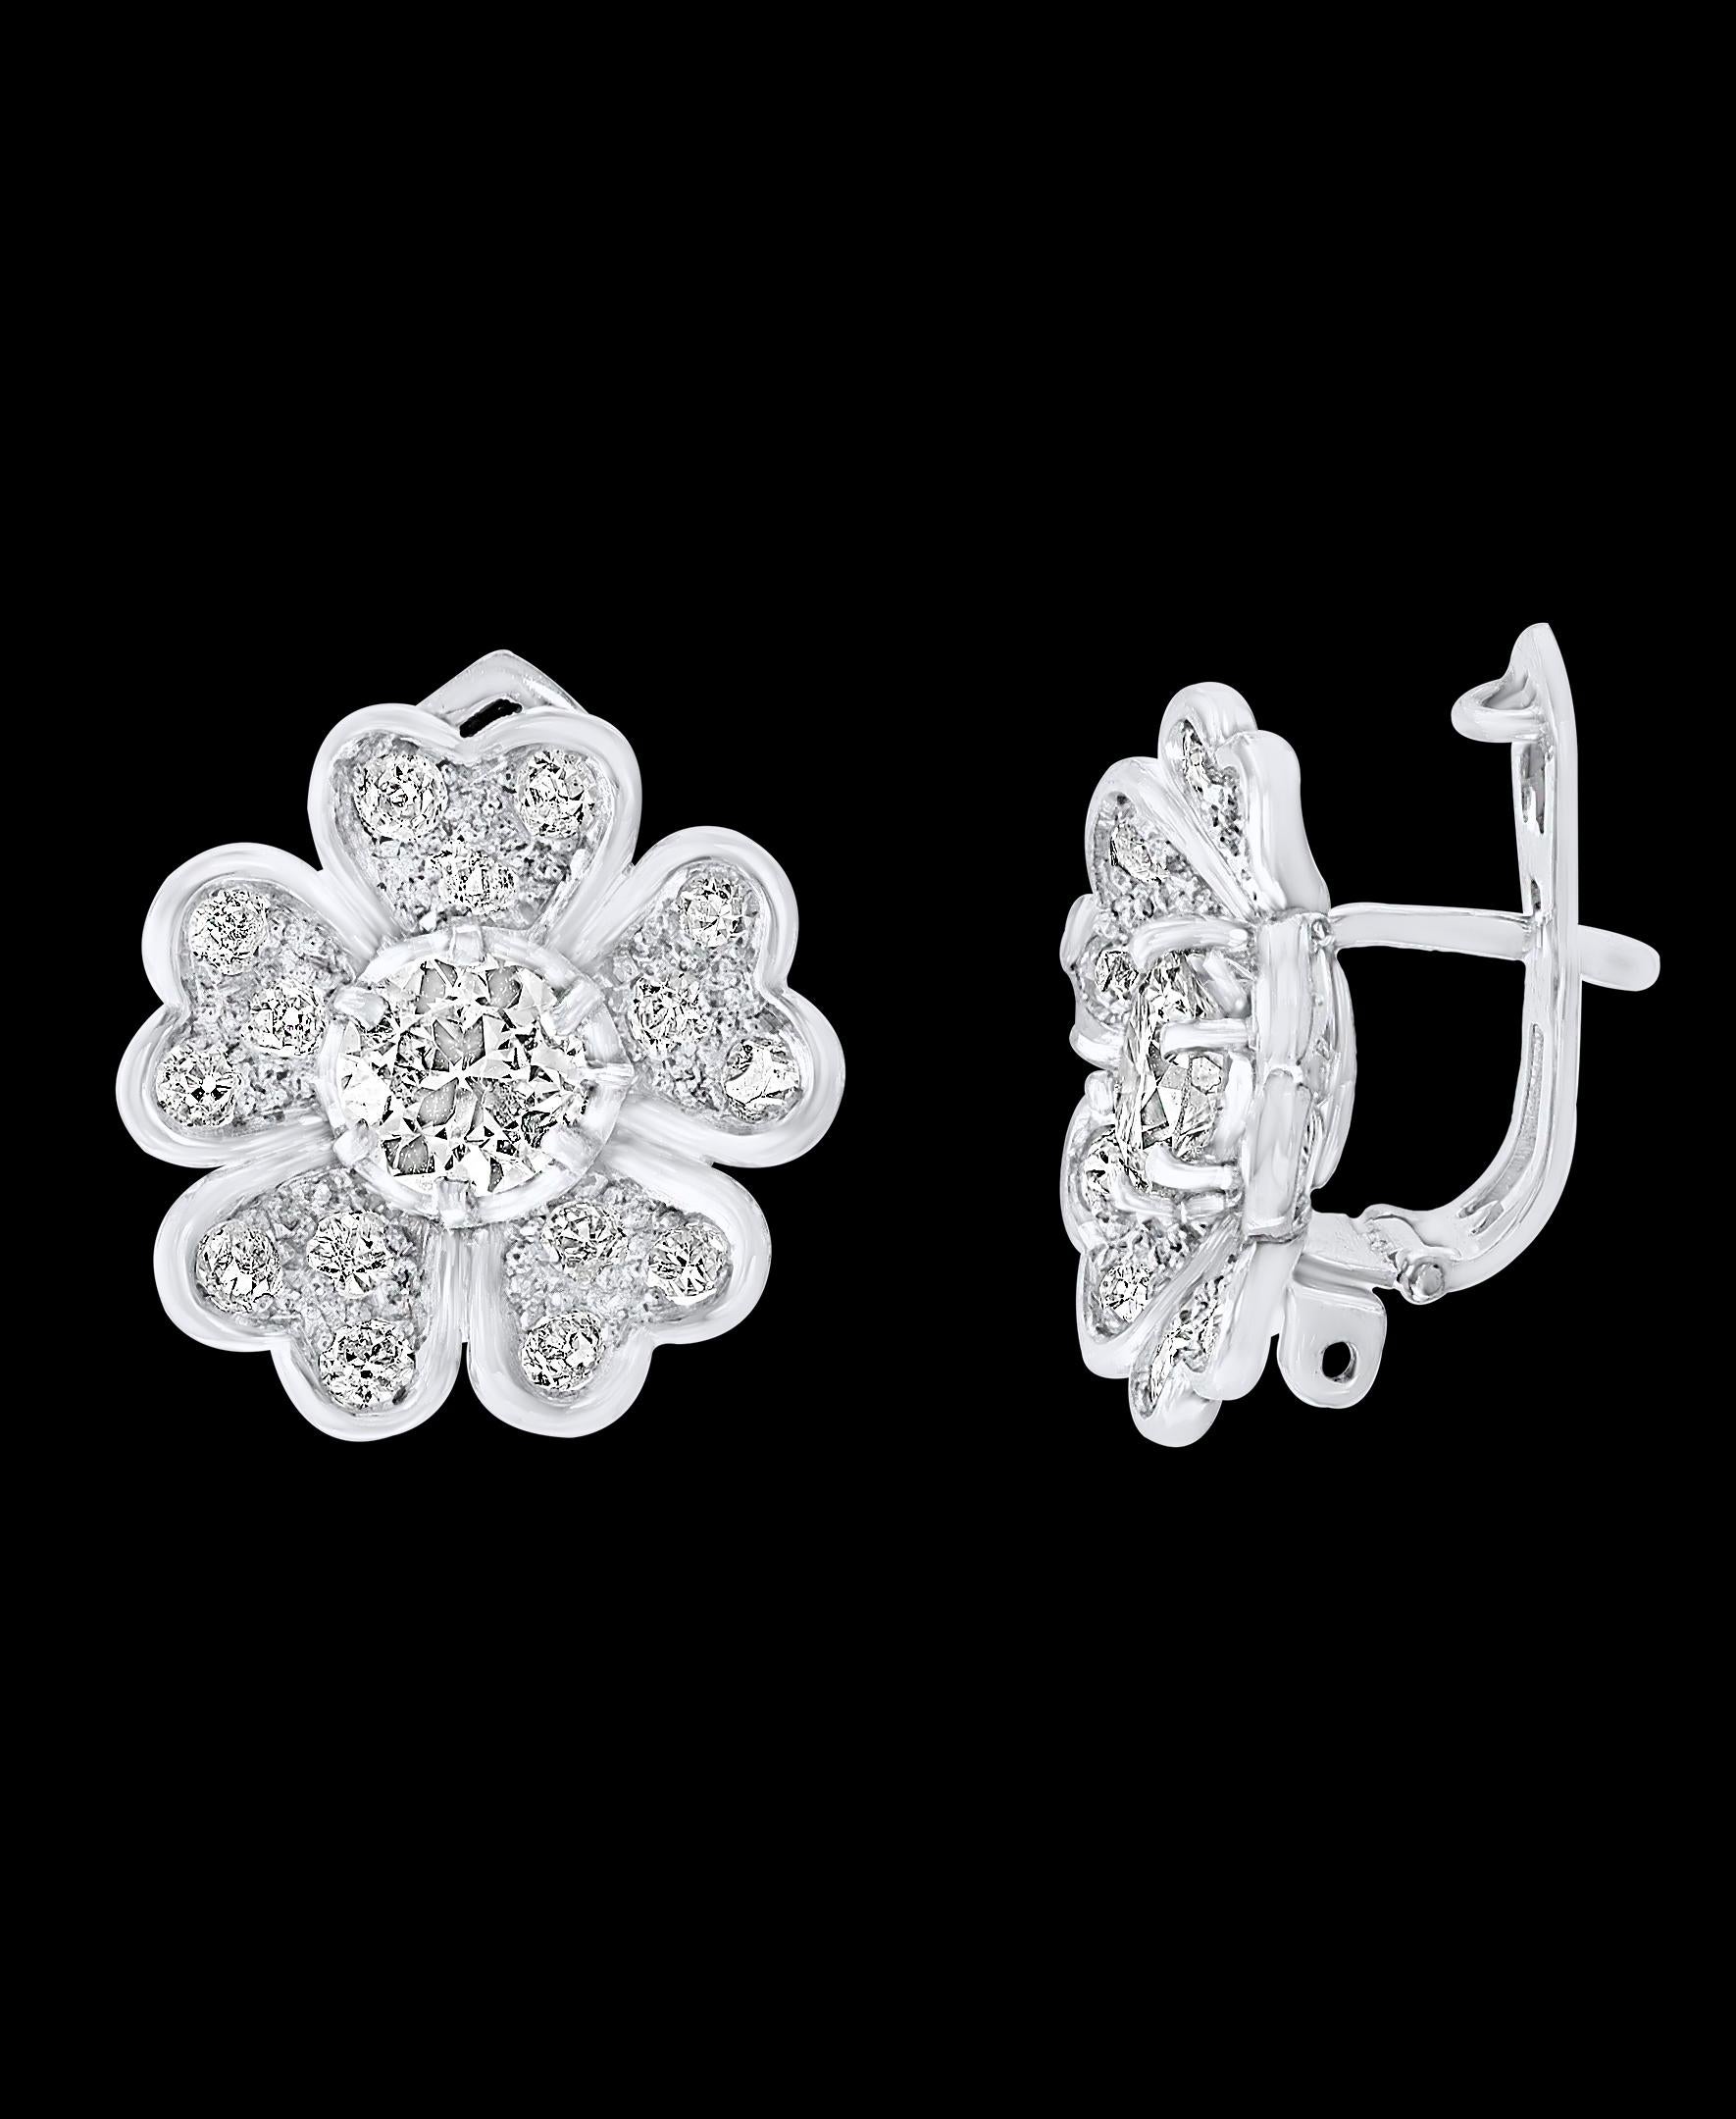 AGI Report # DJ190514001
A fabulous pair of earrings with an enormous amount of look and sparkle!
2.2 carats of F-G color VS clarity diamonds set in solid platinum  with omega backs.
Cluster earrings, centering 0.7 carat round solitaire  diamond 